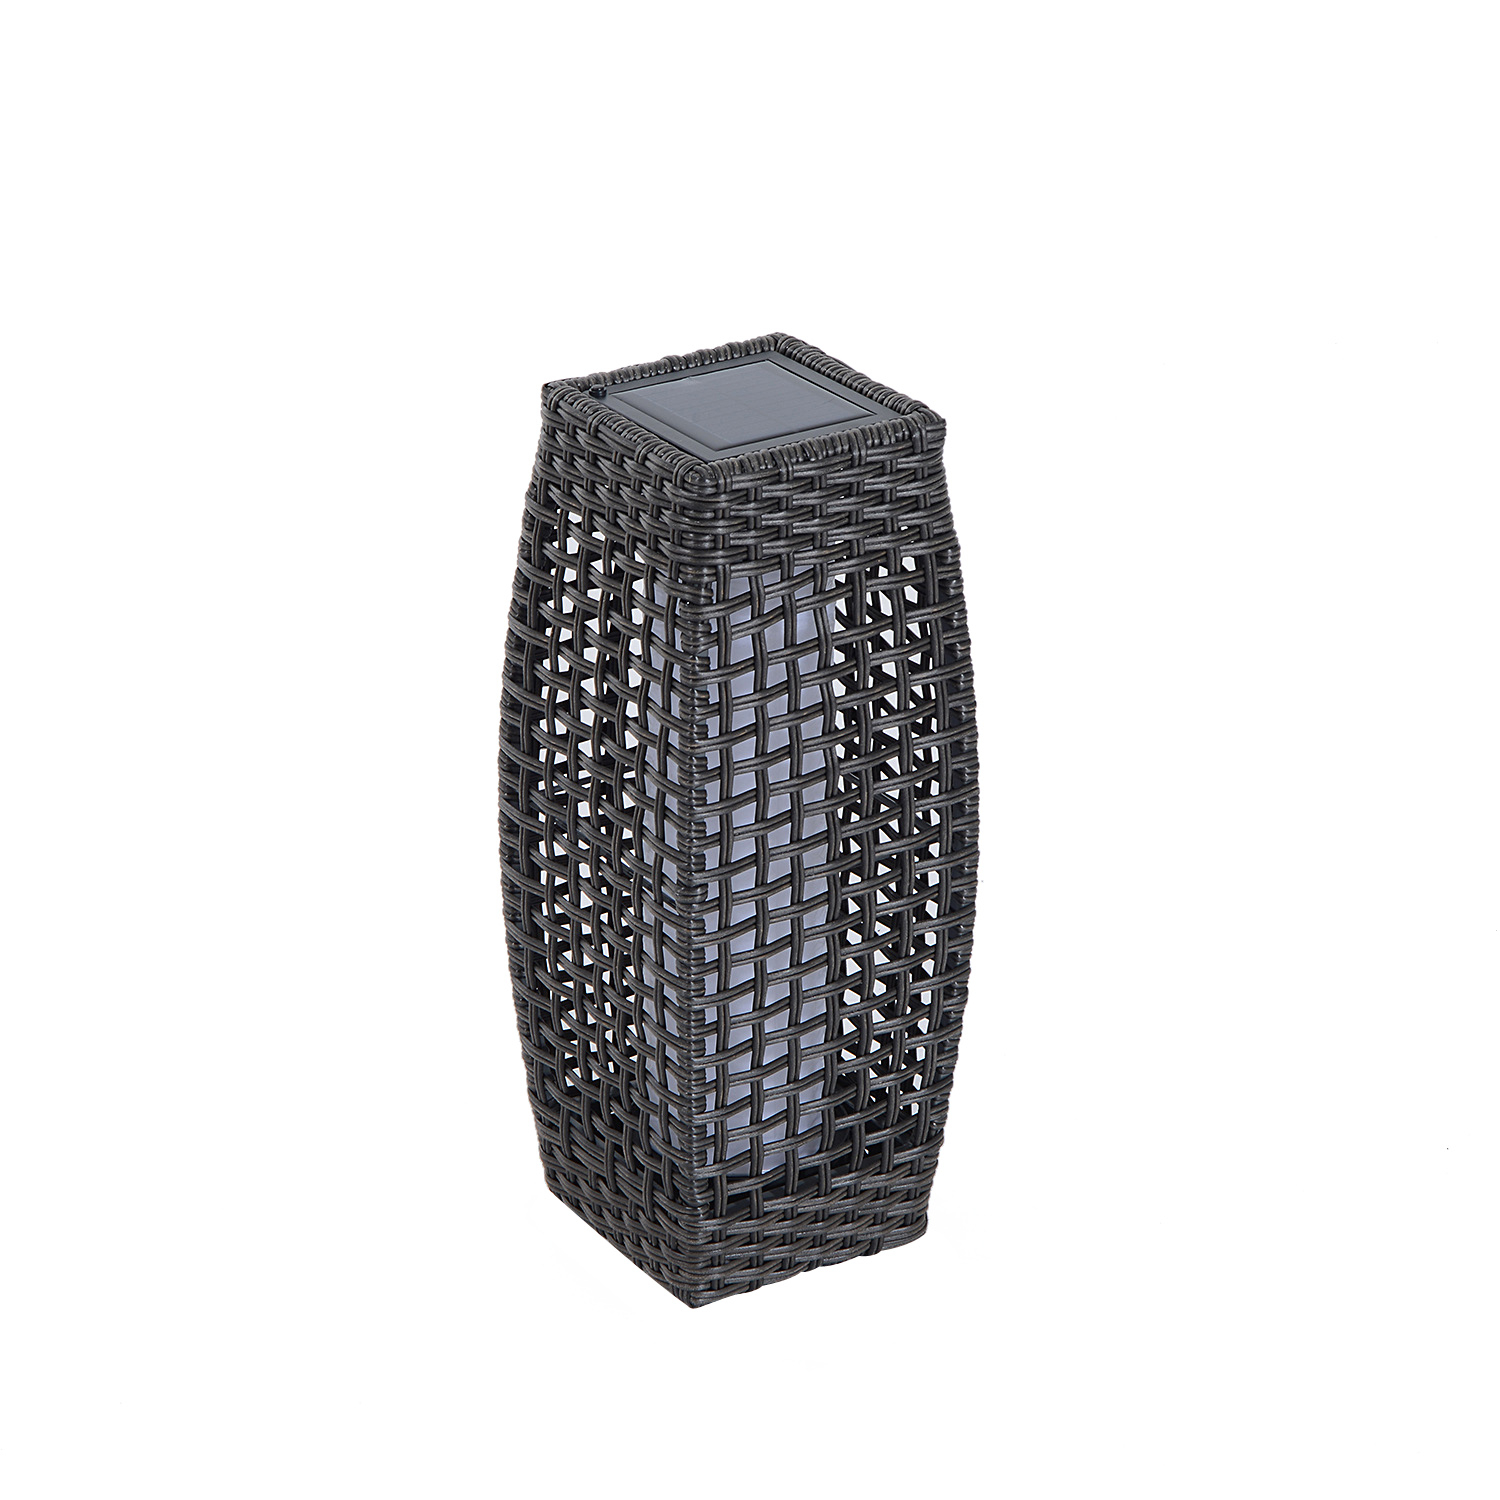 Details About Rattan Solar Powered Lamp Led Tall Lantern Garden Patio Wicker Floor Light Warm throughout proportions 1500 X 1500